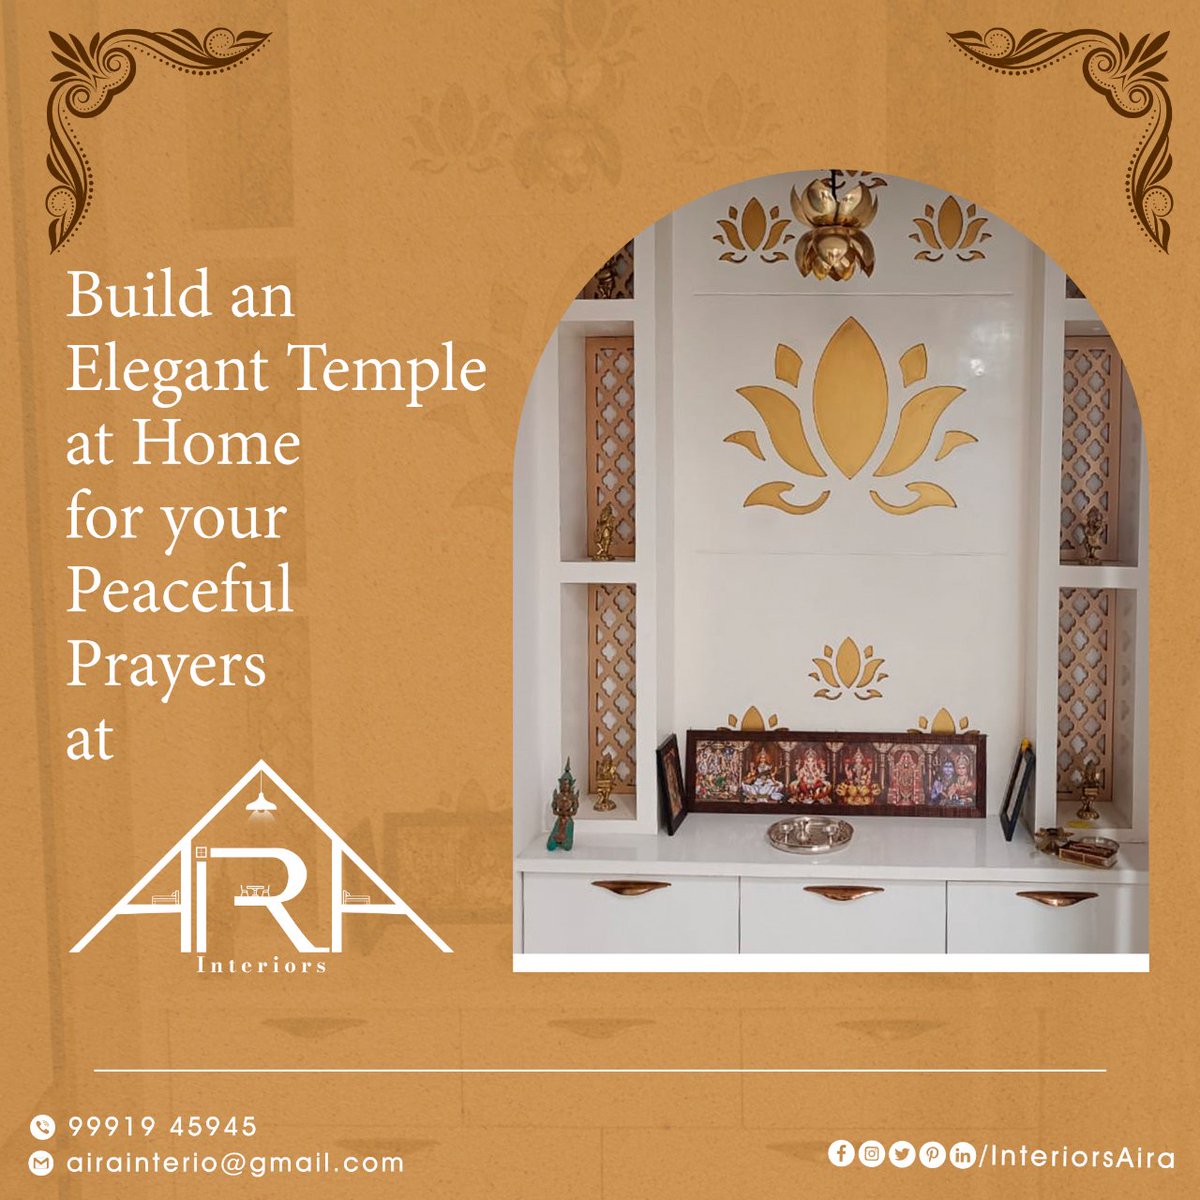 Make your space of devotion beautiful and bright with #Aira!

Contact us now
📞 9991945945
📧 airainterio@gmail.com

#Airainteriors #poojaroom #poojaroomdecor #homedecor #home #temple #hyderabad #devotional #hometemple #interior #interiors #culture #indianhome #indianethnic